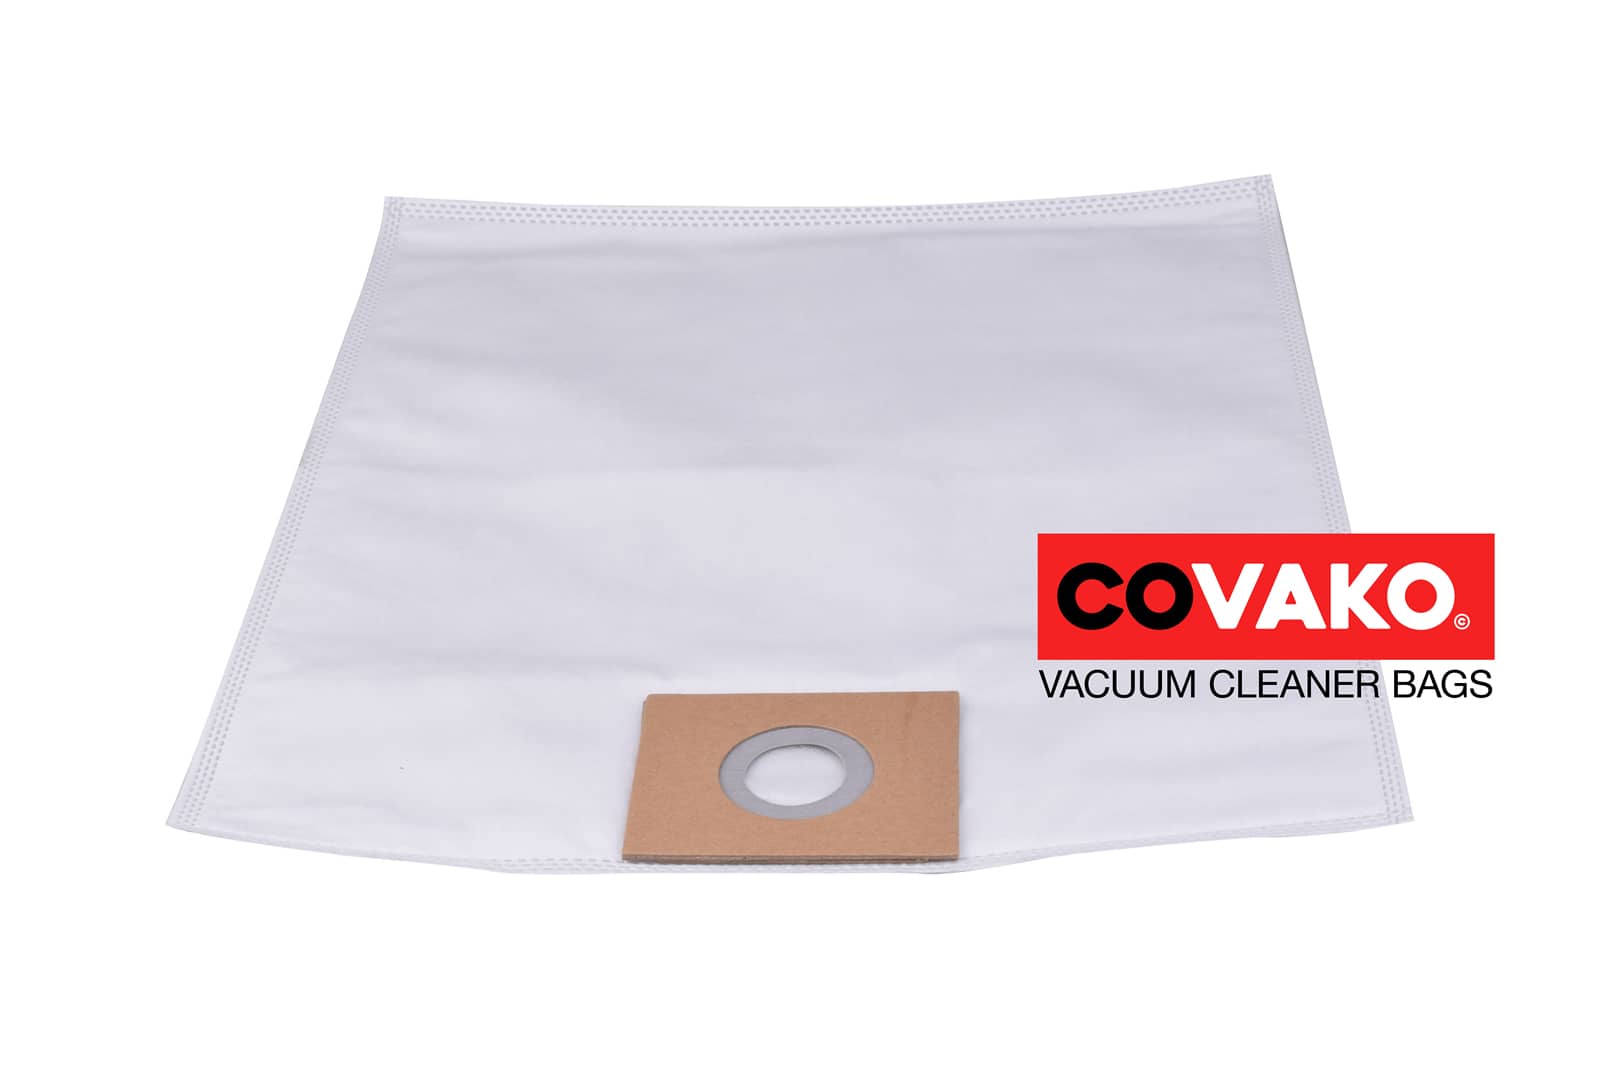 Fimap FV 15 Eco Energy / Synthesis - Fimap vacuum cleaner bags